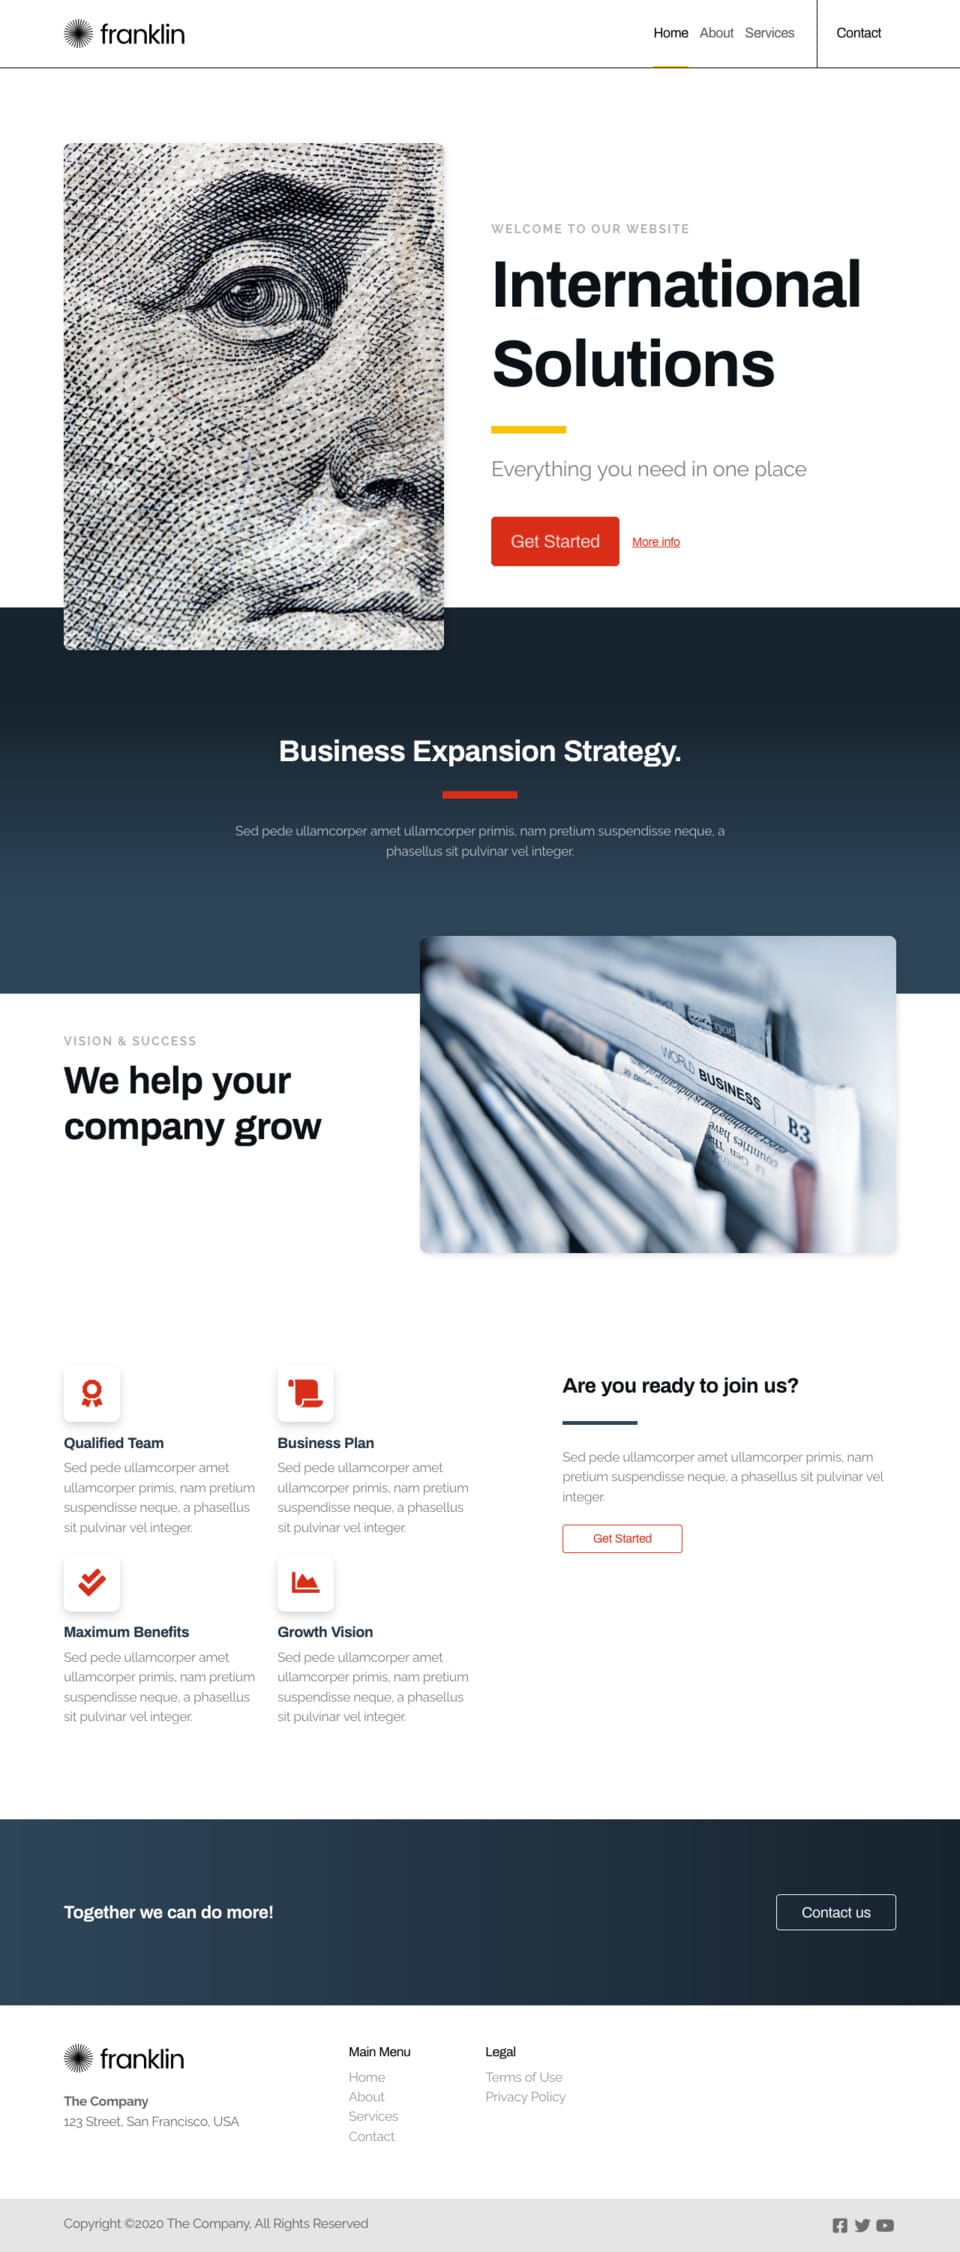 Franklin Website Template - Ideal for small businesses in finance, money, accounting, and advisory sectors looking to create a professional online presence.